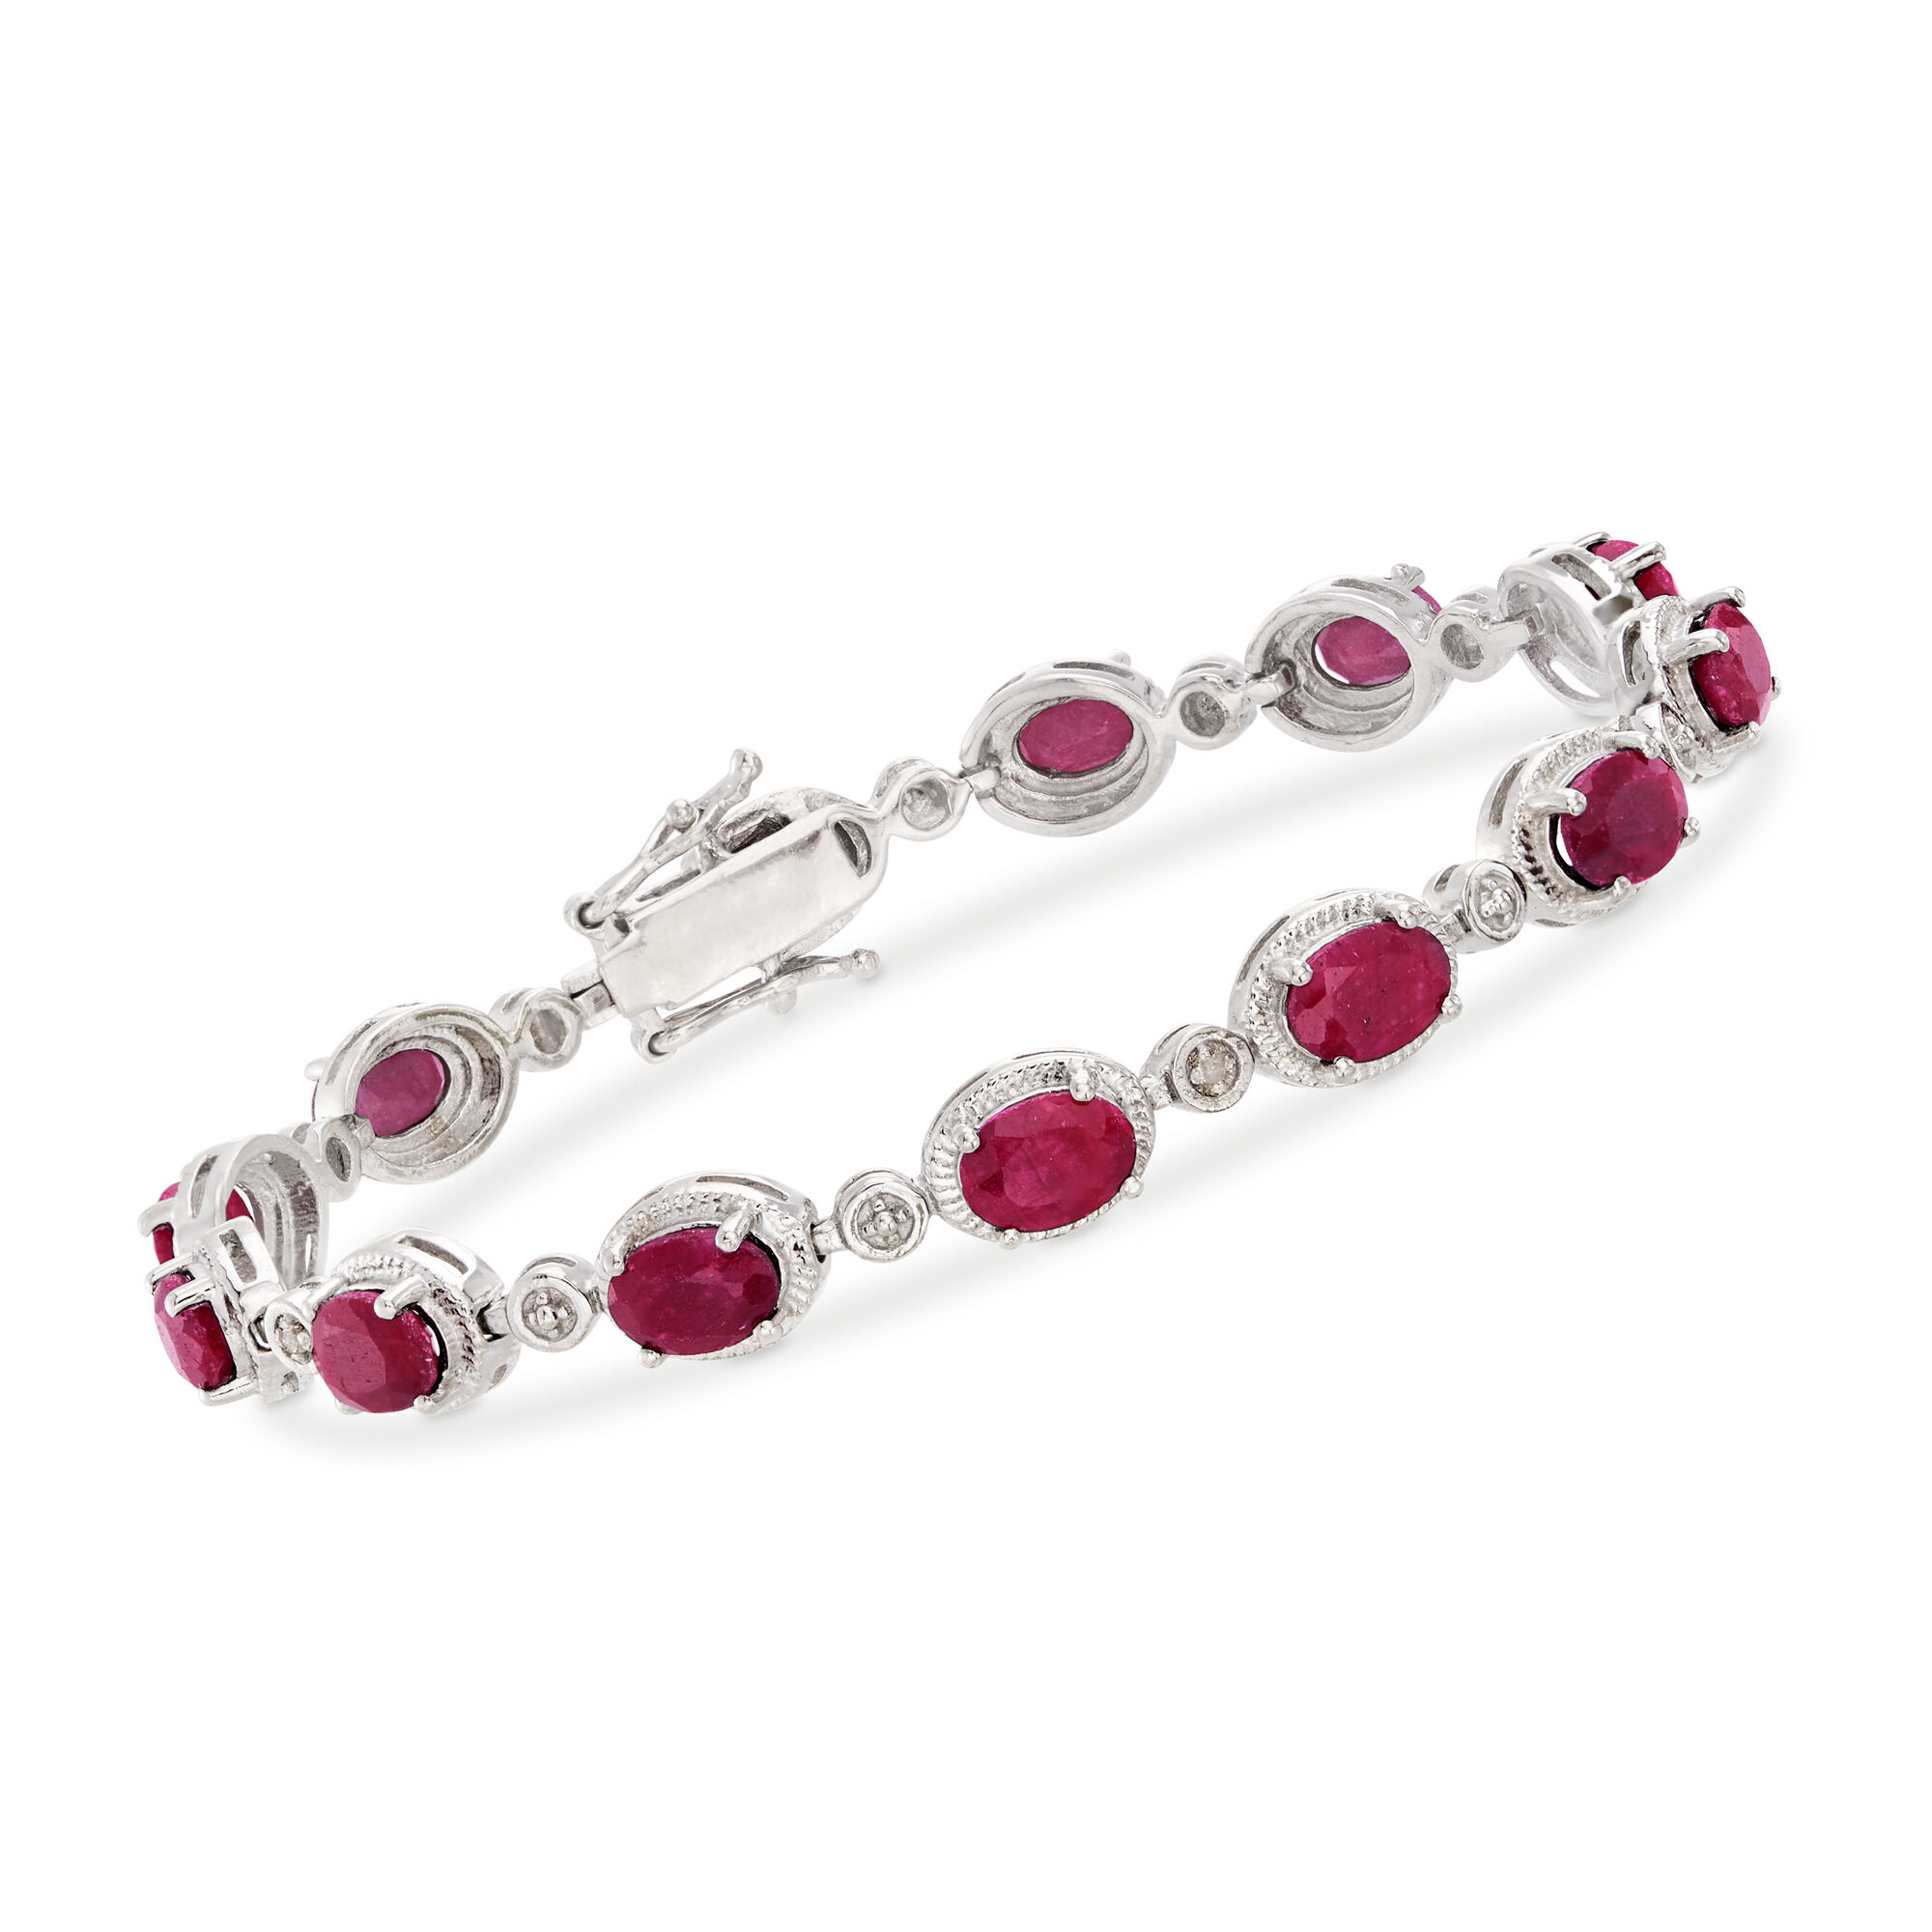 Amazon.com: YONKU Hand Crafted_Aaa++ Qulaity Red Ruby Bracelet, Ruby  Rondelle, Natural Ruby Smooth Rondelle Beads, Natural Earth-Mined Ruby  Beads, Size 8mm To 10mm,Beads YO-BRACE-3126: Clothing, Shoes & Jewelry